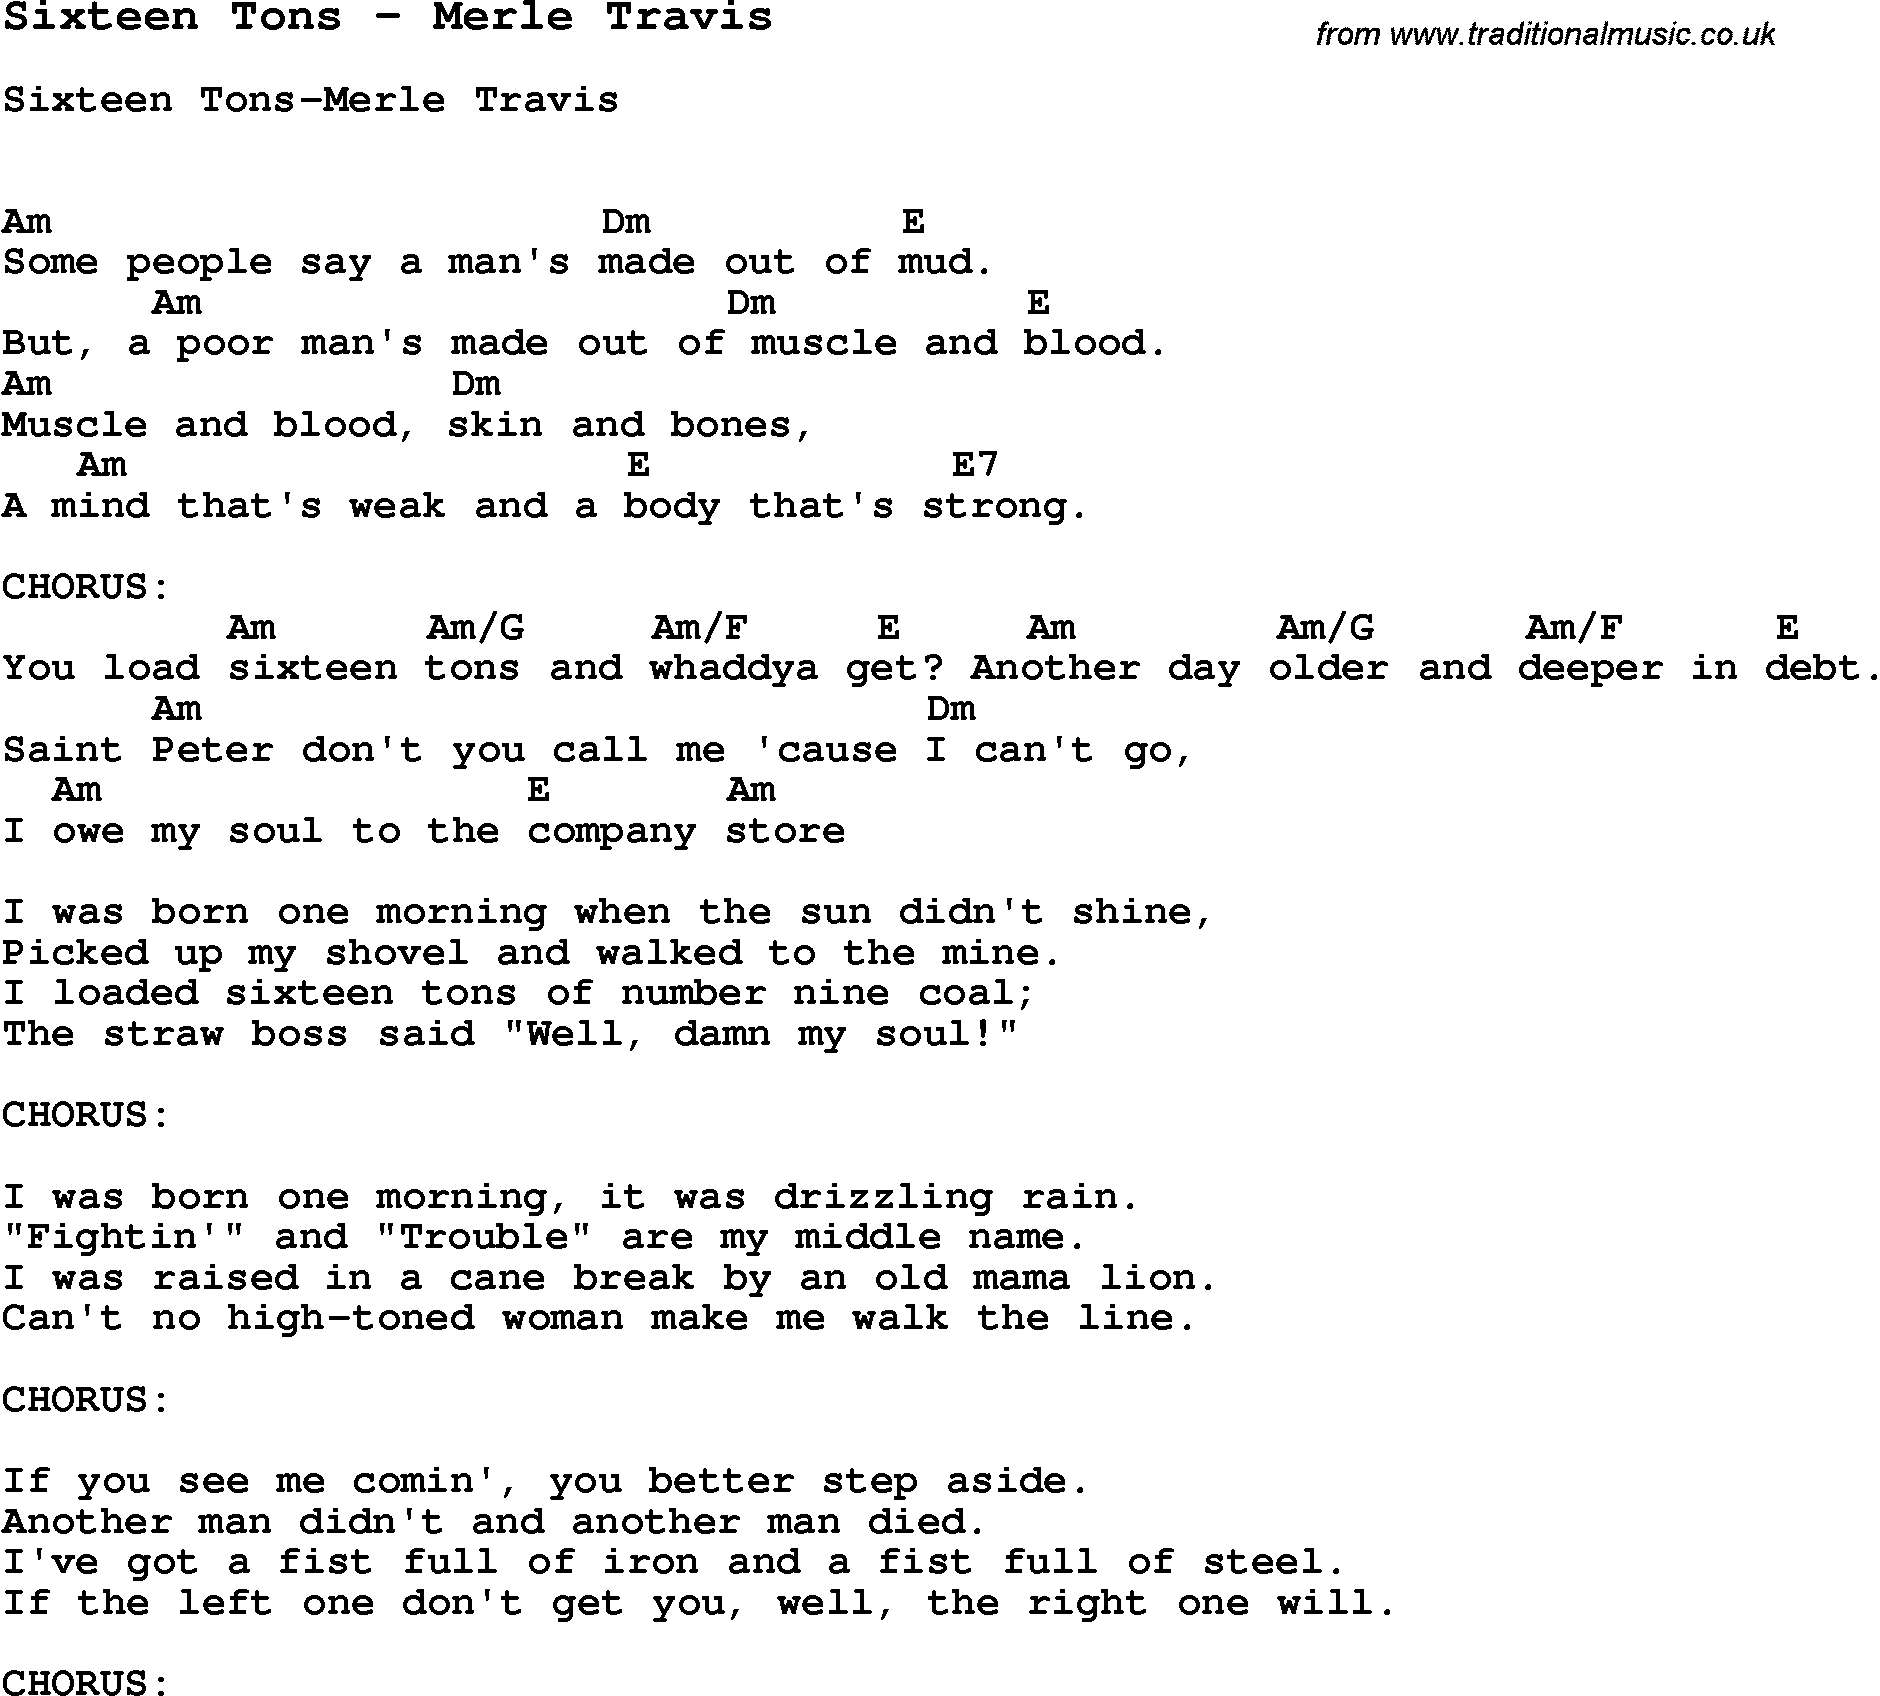 Song Sixteen Tons by Merle Travis, with lyrics for vocal performance and accompaniment chords for Ukulele, Guitar Banjo etc.